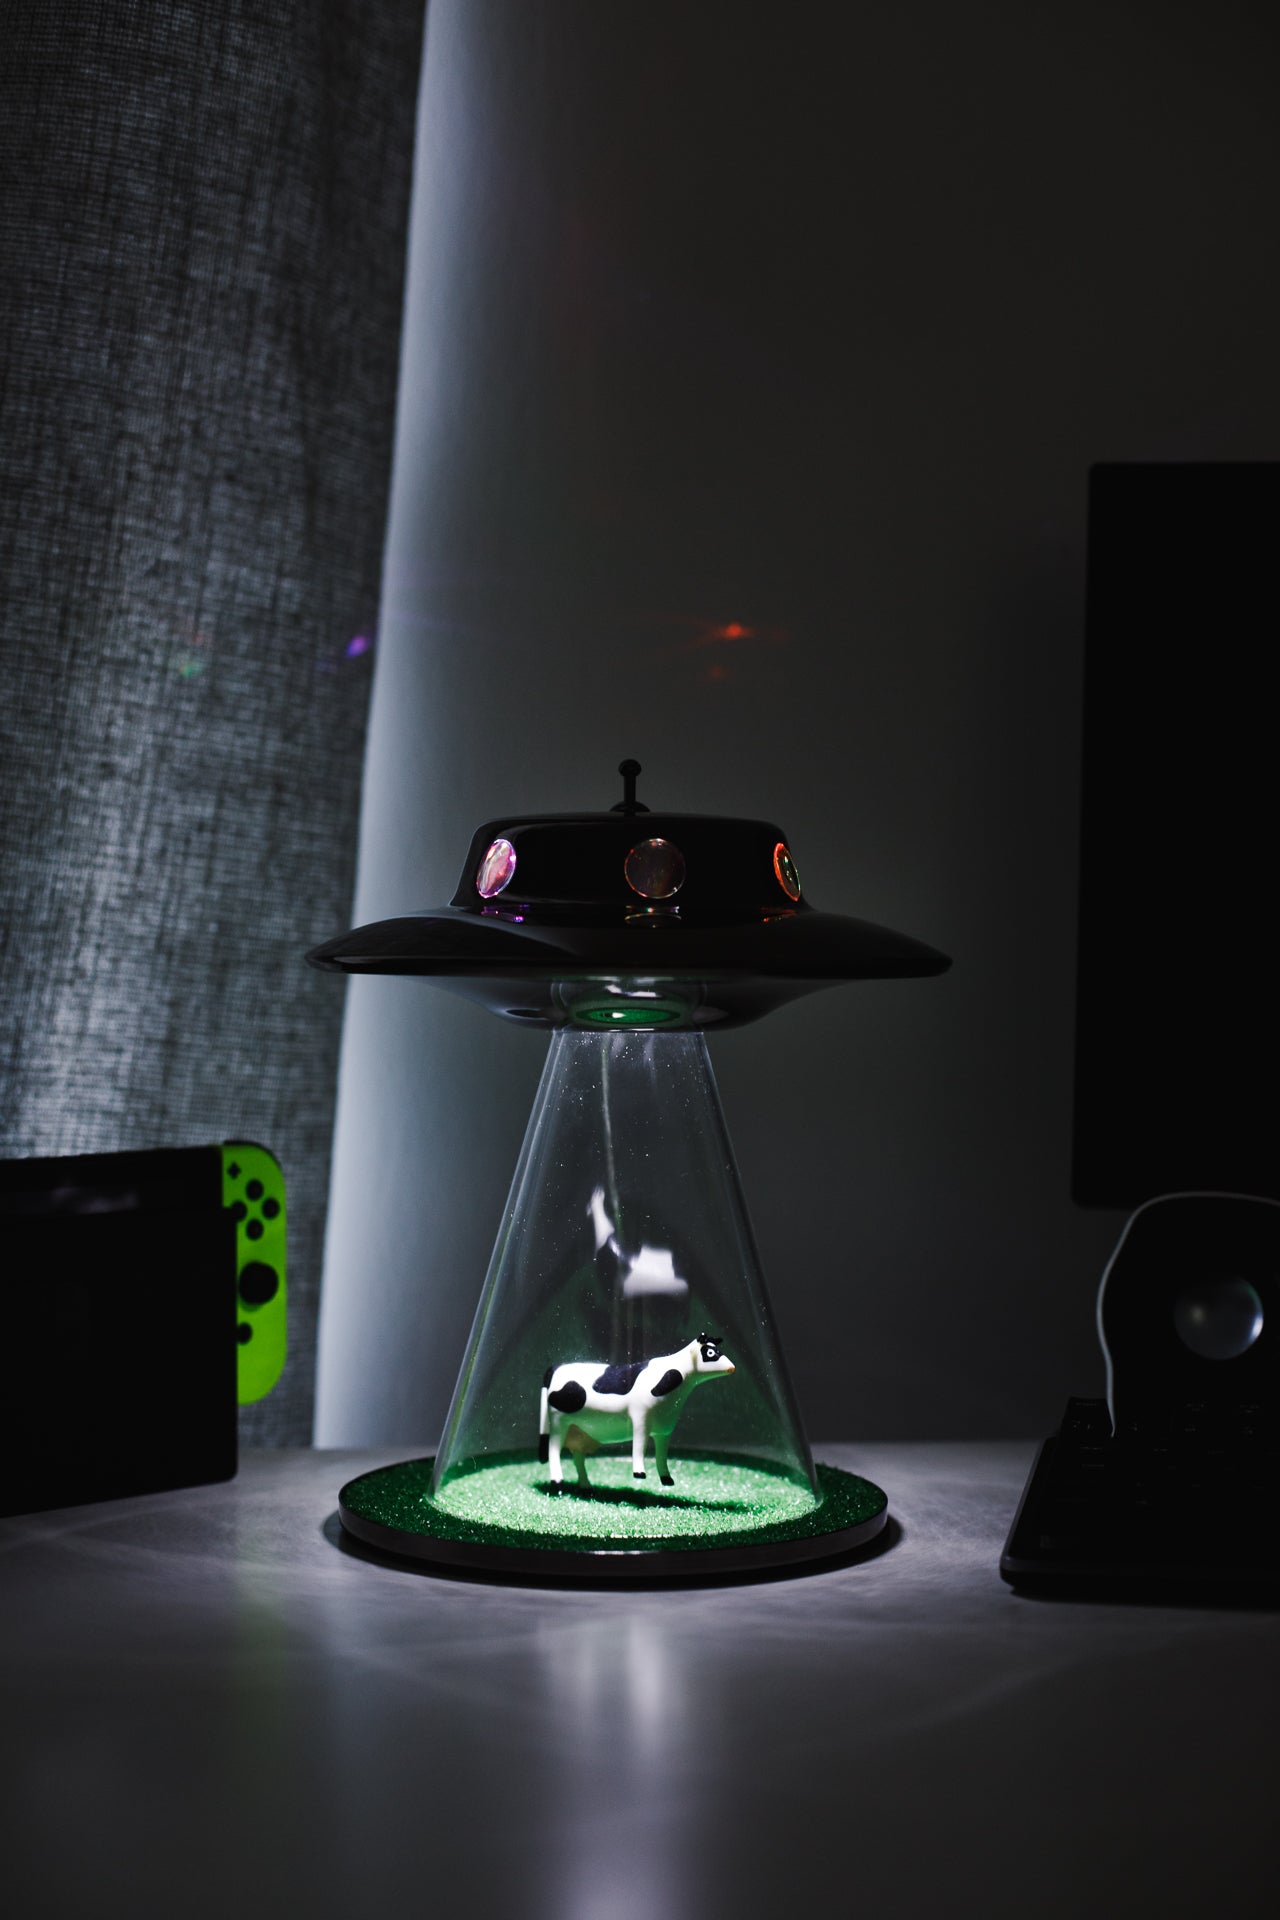 A UFO themed bedroom desktop alien lamp pictured next to a Nintendo Switch. This UFO lamp is the ultimate bedroom accessory and gift for alien lovers and outer space fanatics. Get your alien abduction lamp today!